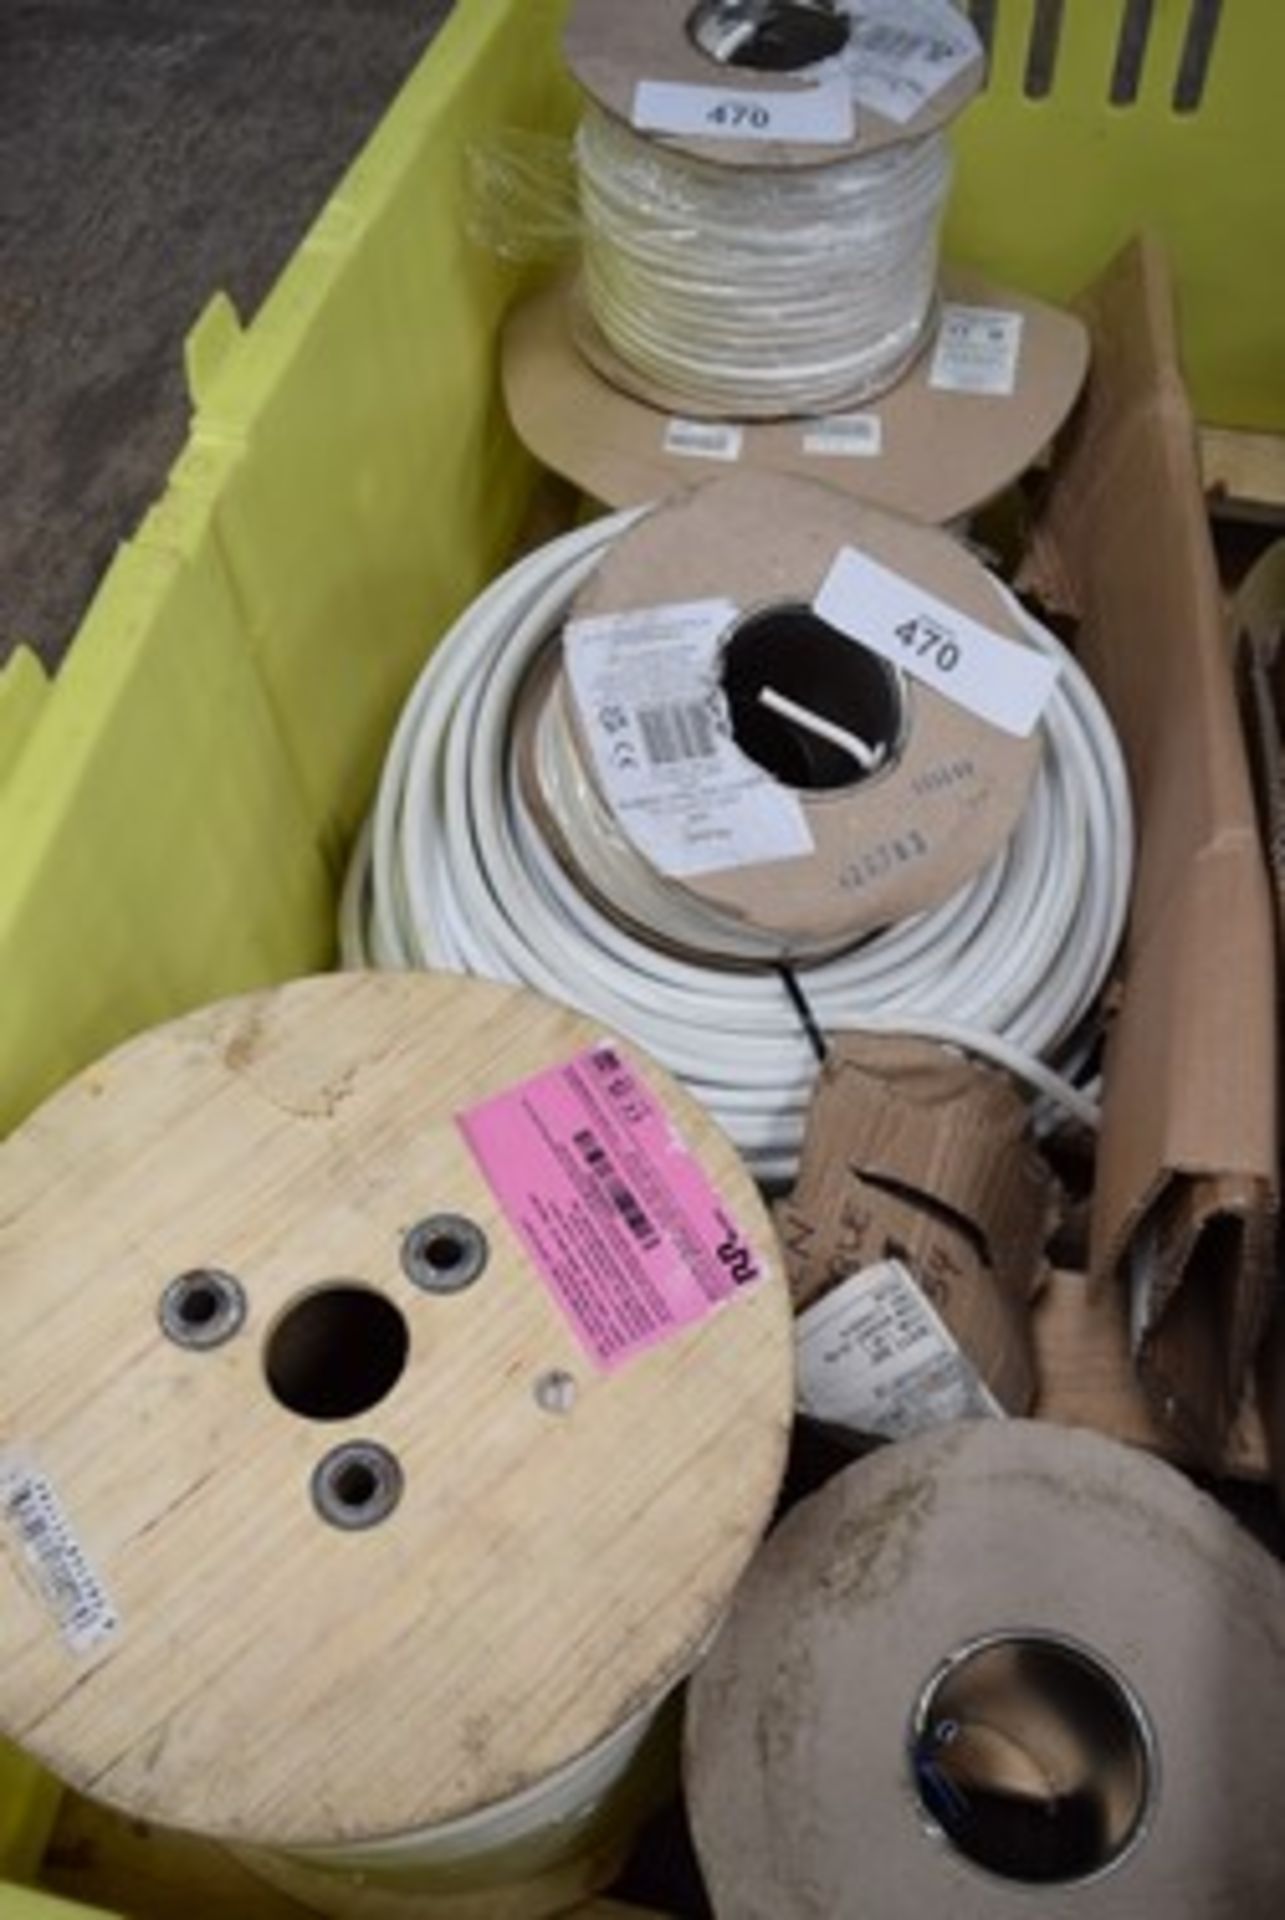 A selection of wire, including 1 x 100m reel of RR Kabel 2.5mm white, 2 x PXcables 50m reels, 1 x